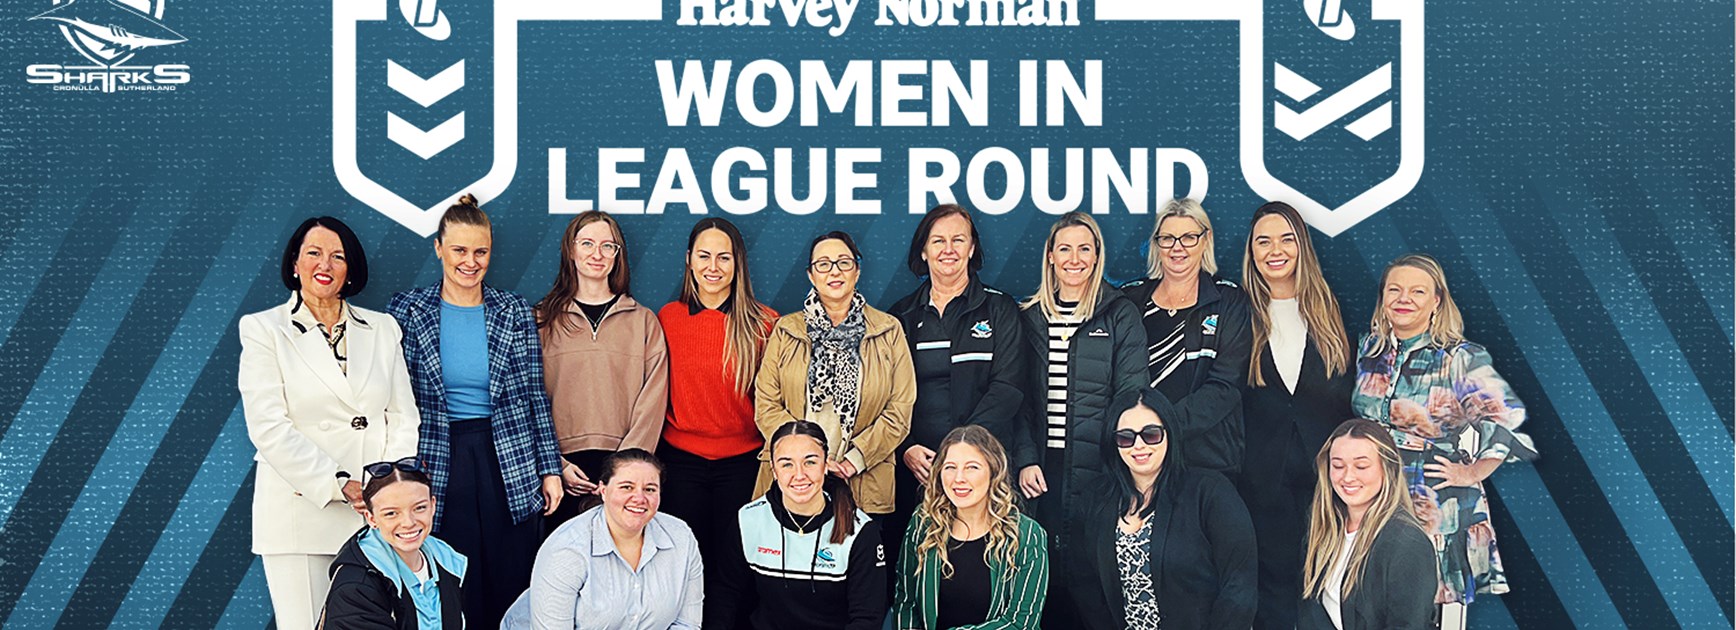 Tynan inspires Sharks staff during Women in League Round